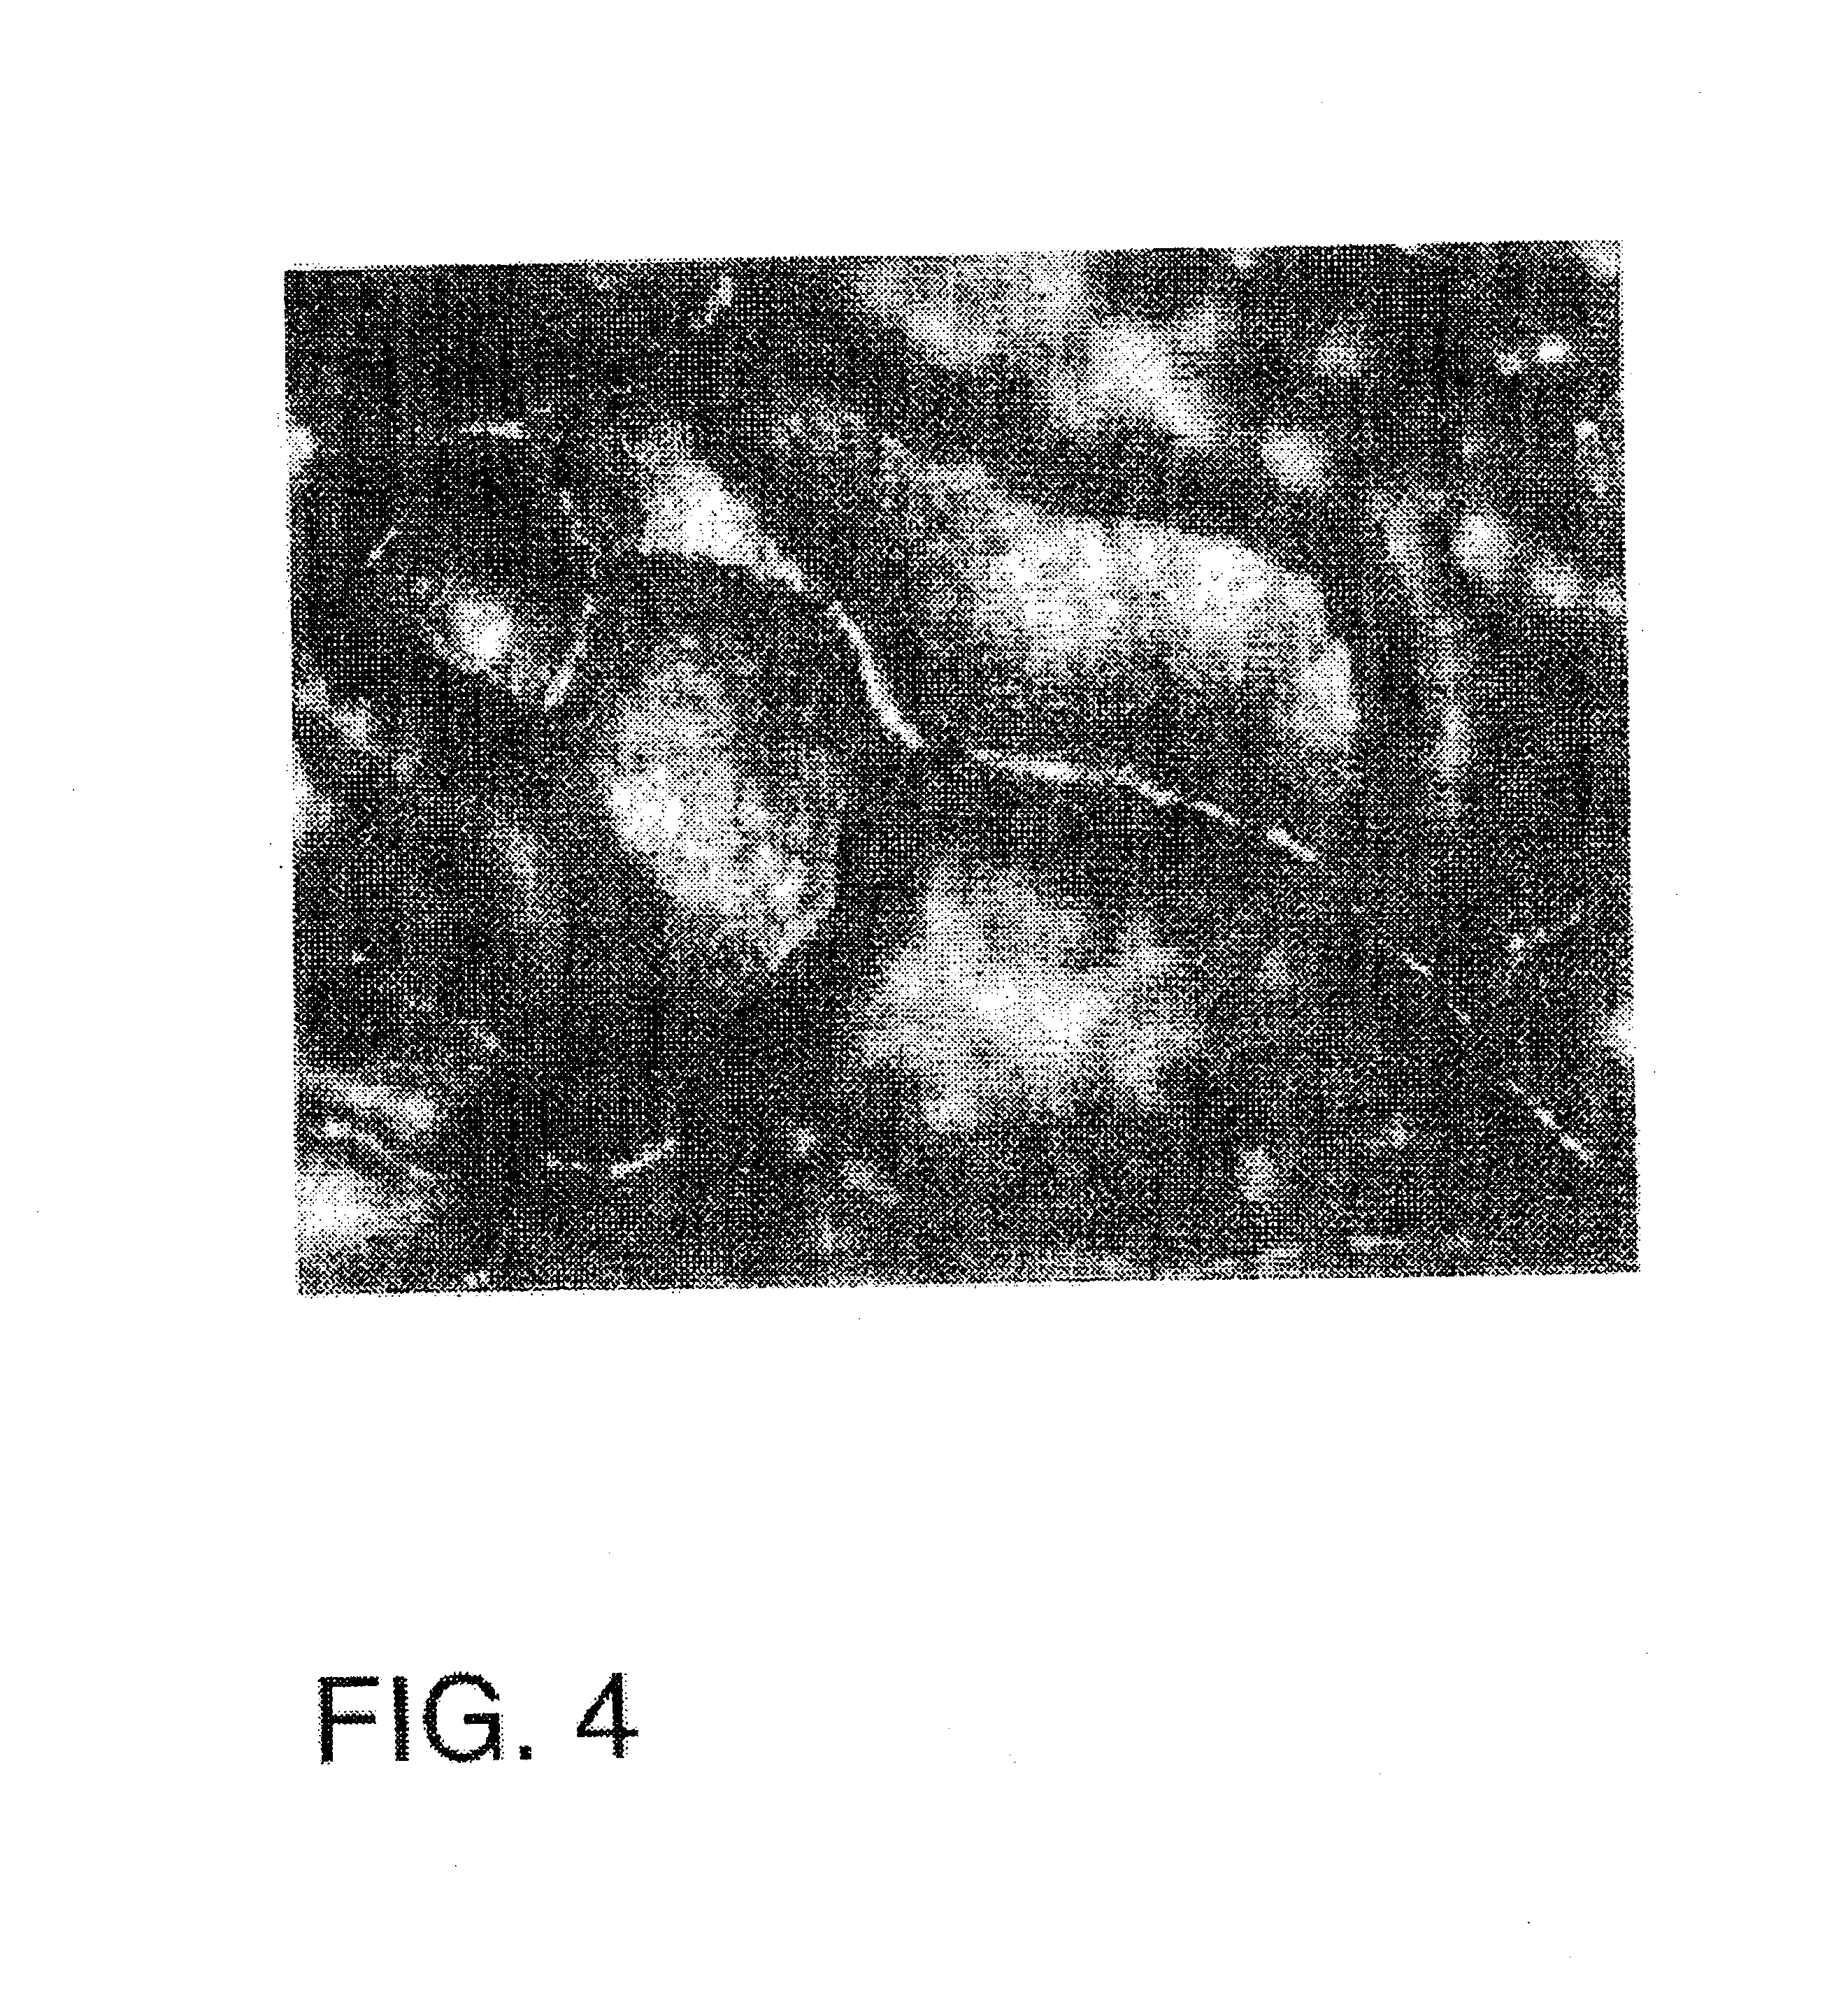 Surface for use on implantable device